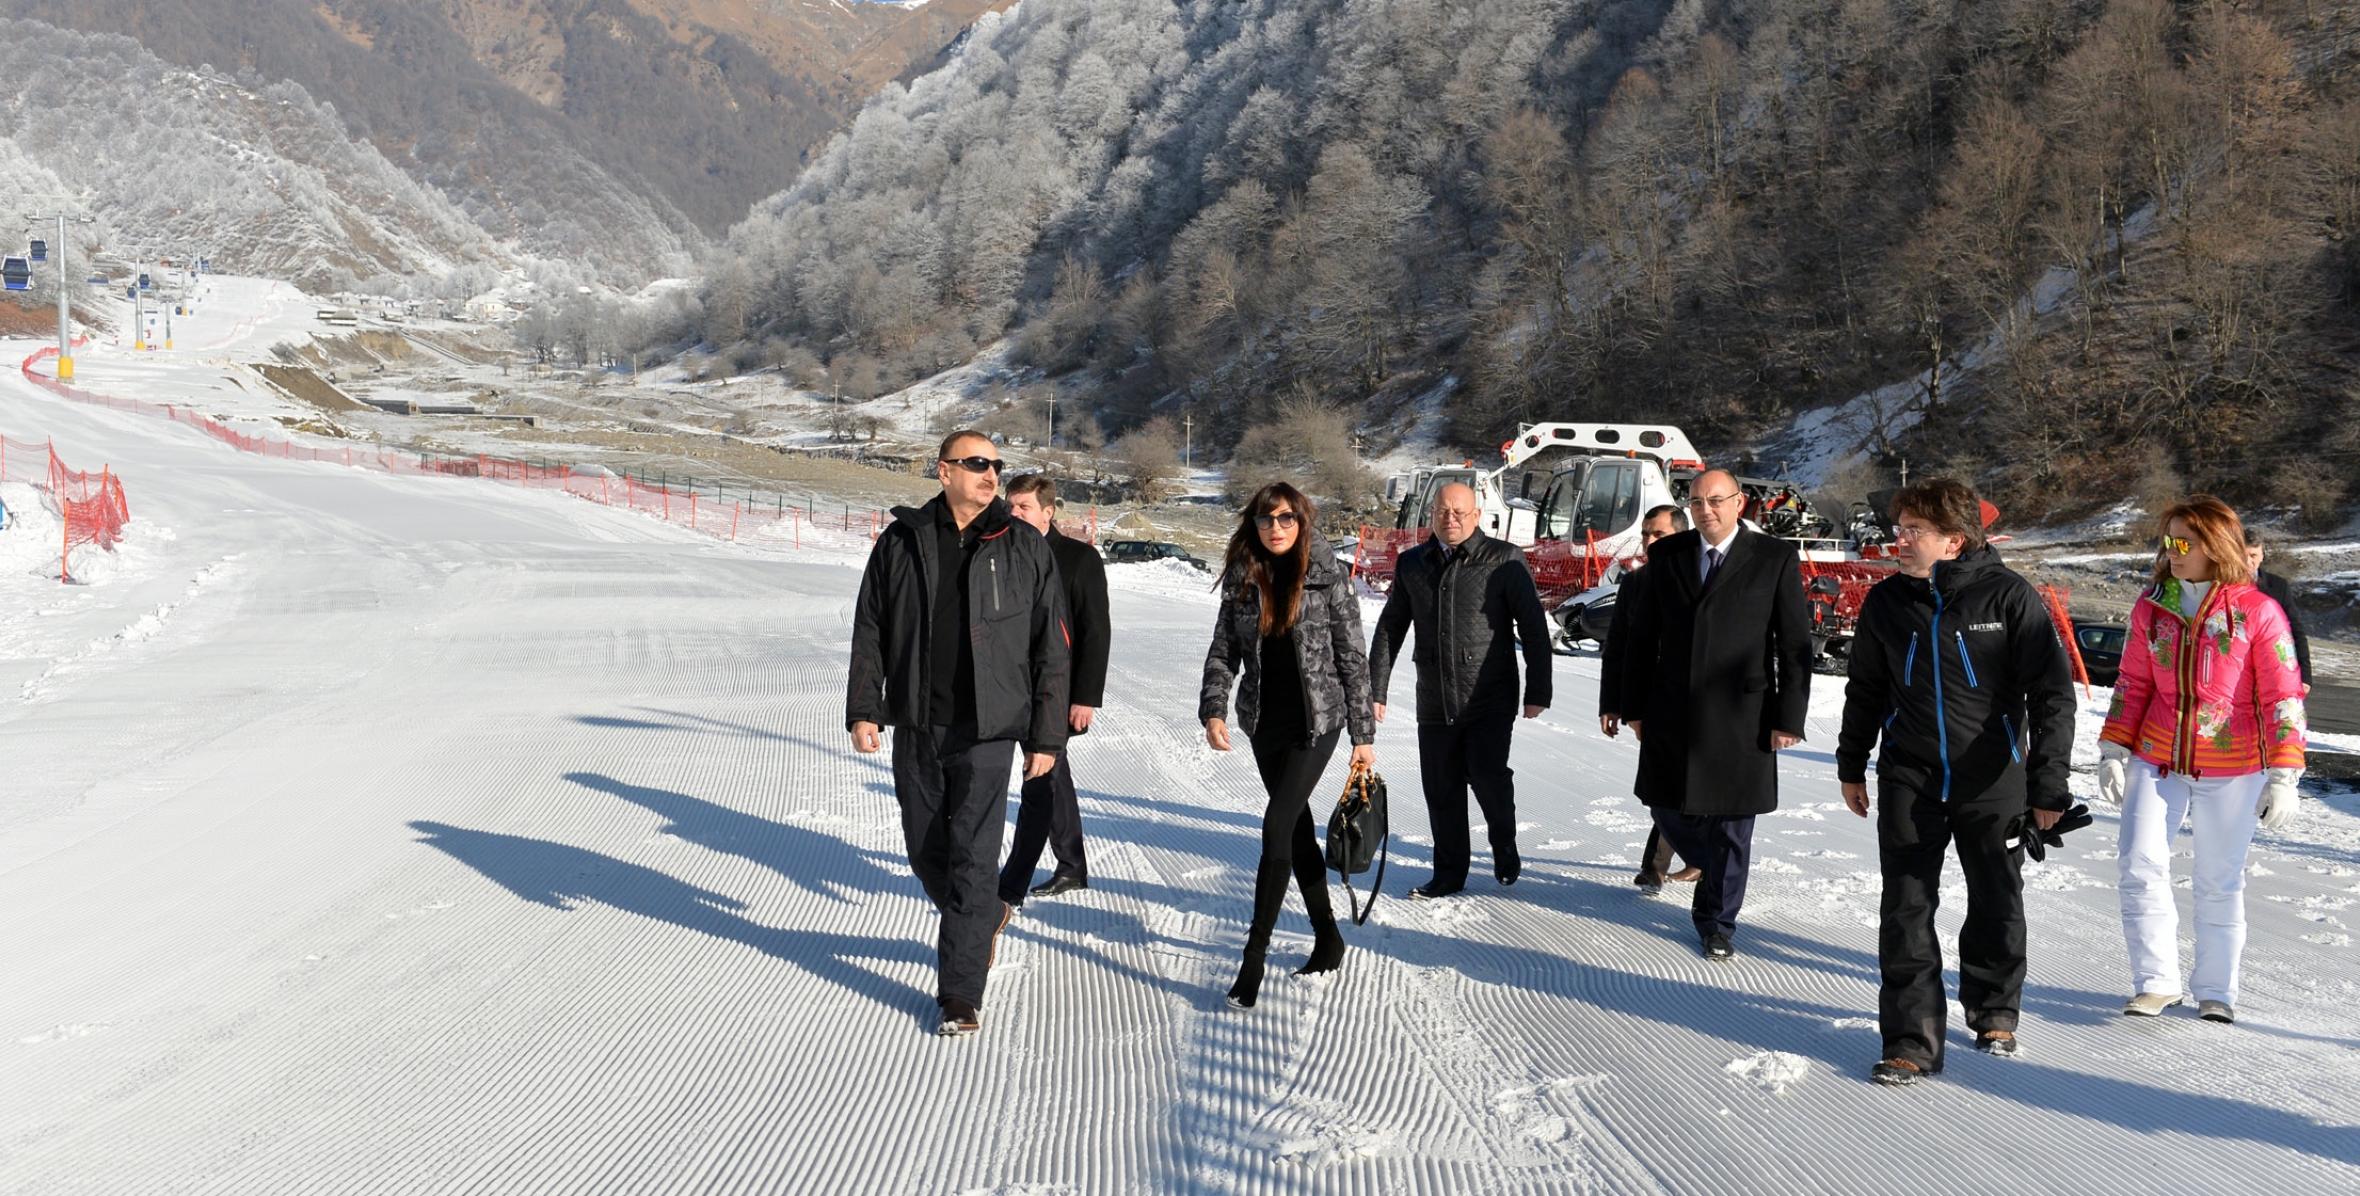 Ilham Aliyev attended the opening ceremony of the first line of the “Tufan” summer and winter ski resort in Gabala